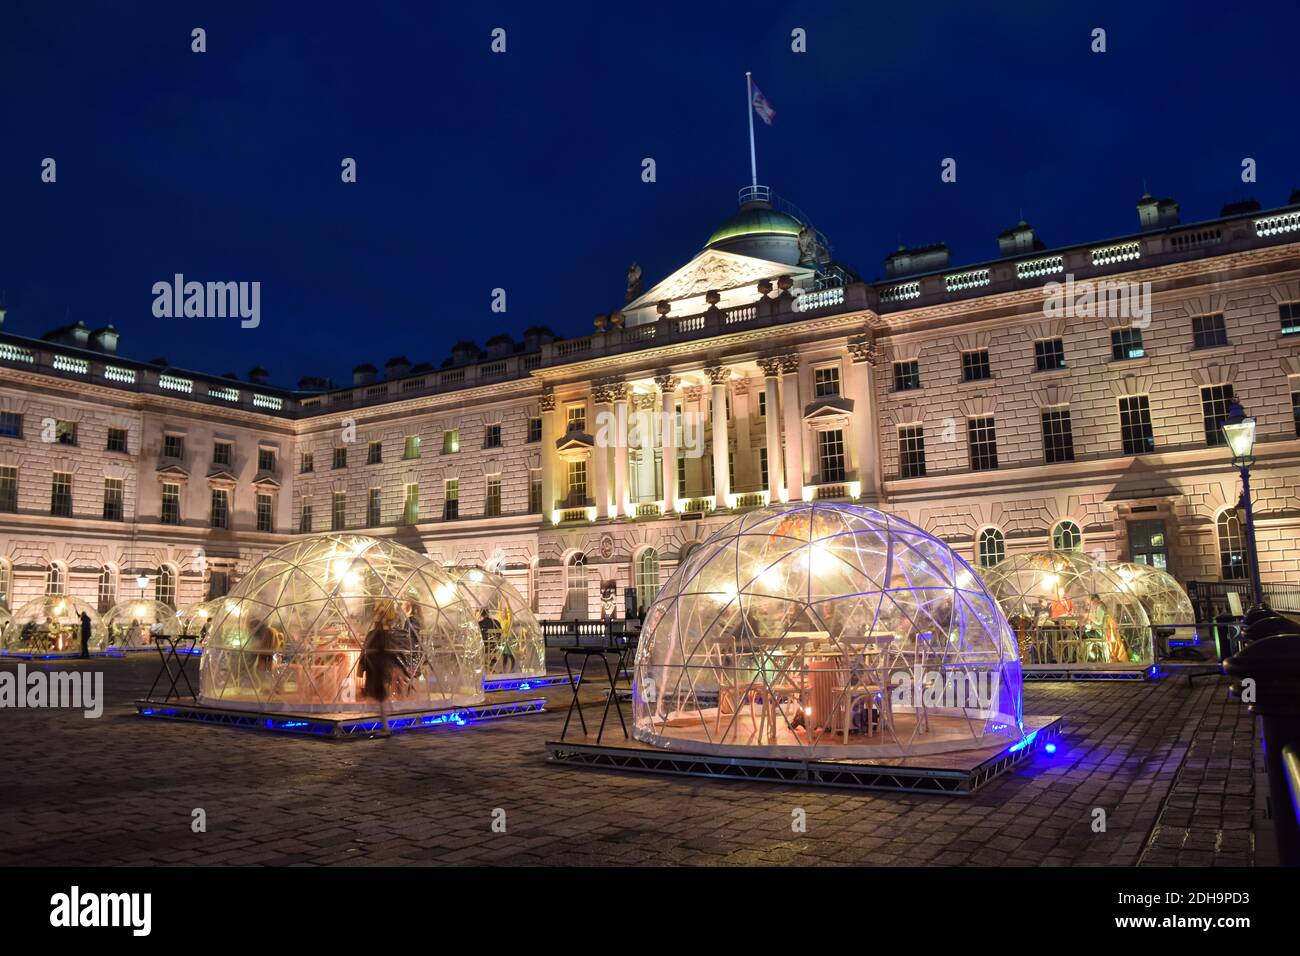 View of Winter Domes at Somerset House in London. The domes, resembling igloos, are installed in the courtyard for indoor private dining during the winter months. Stock Photo